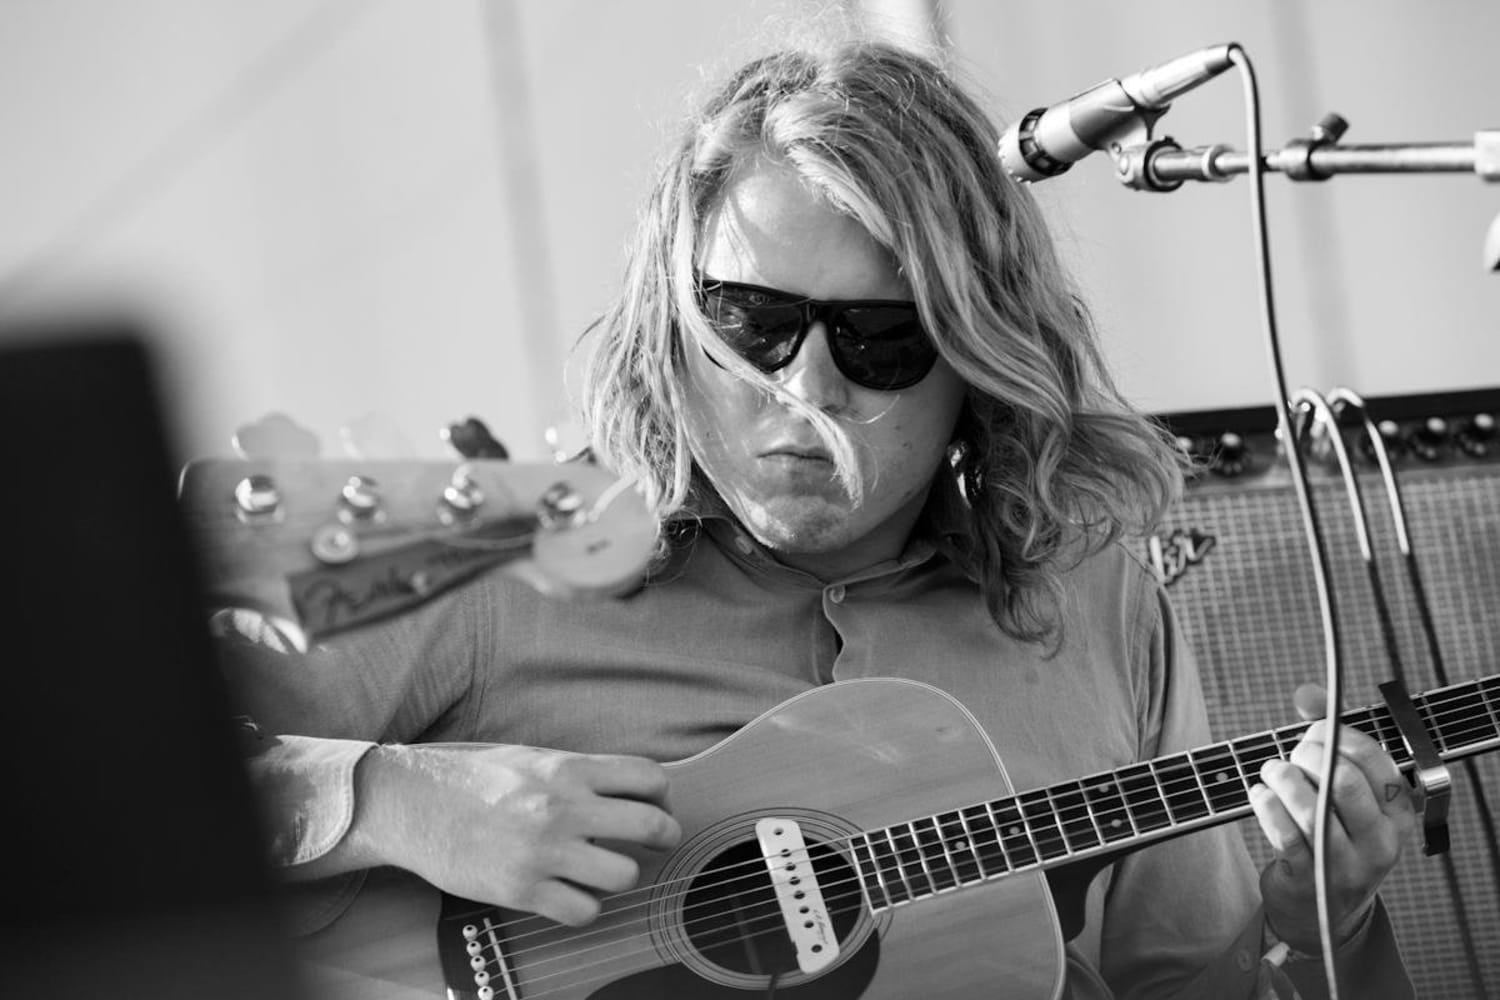 Listen to Ty Segall play live at Primavera Sound 2014